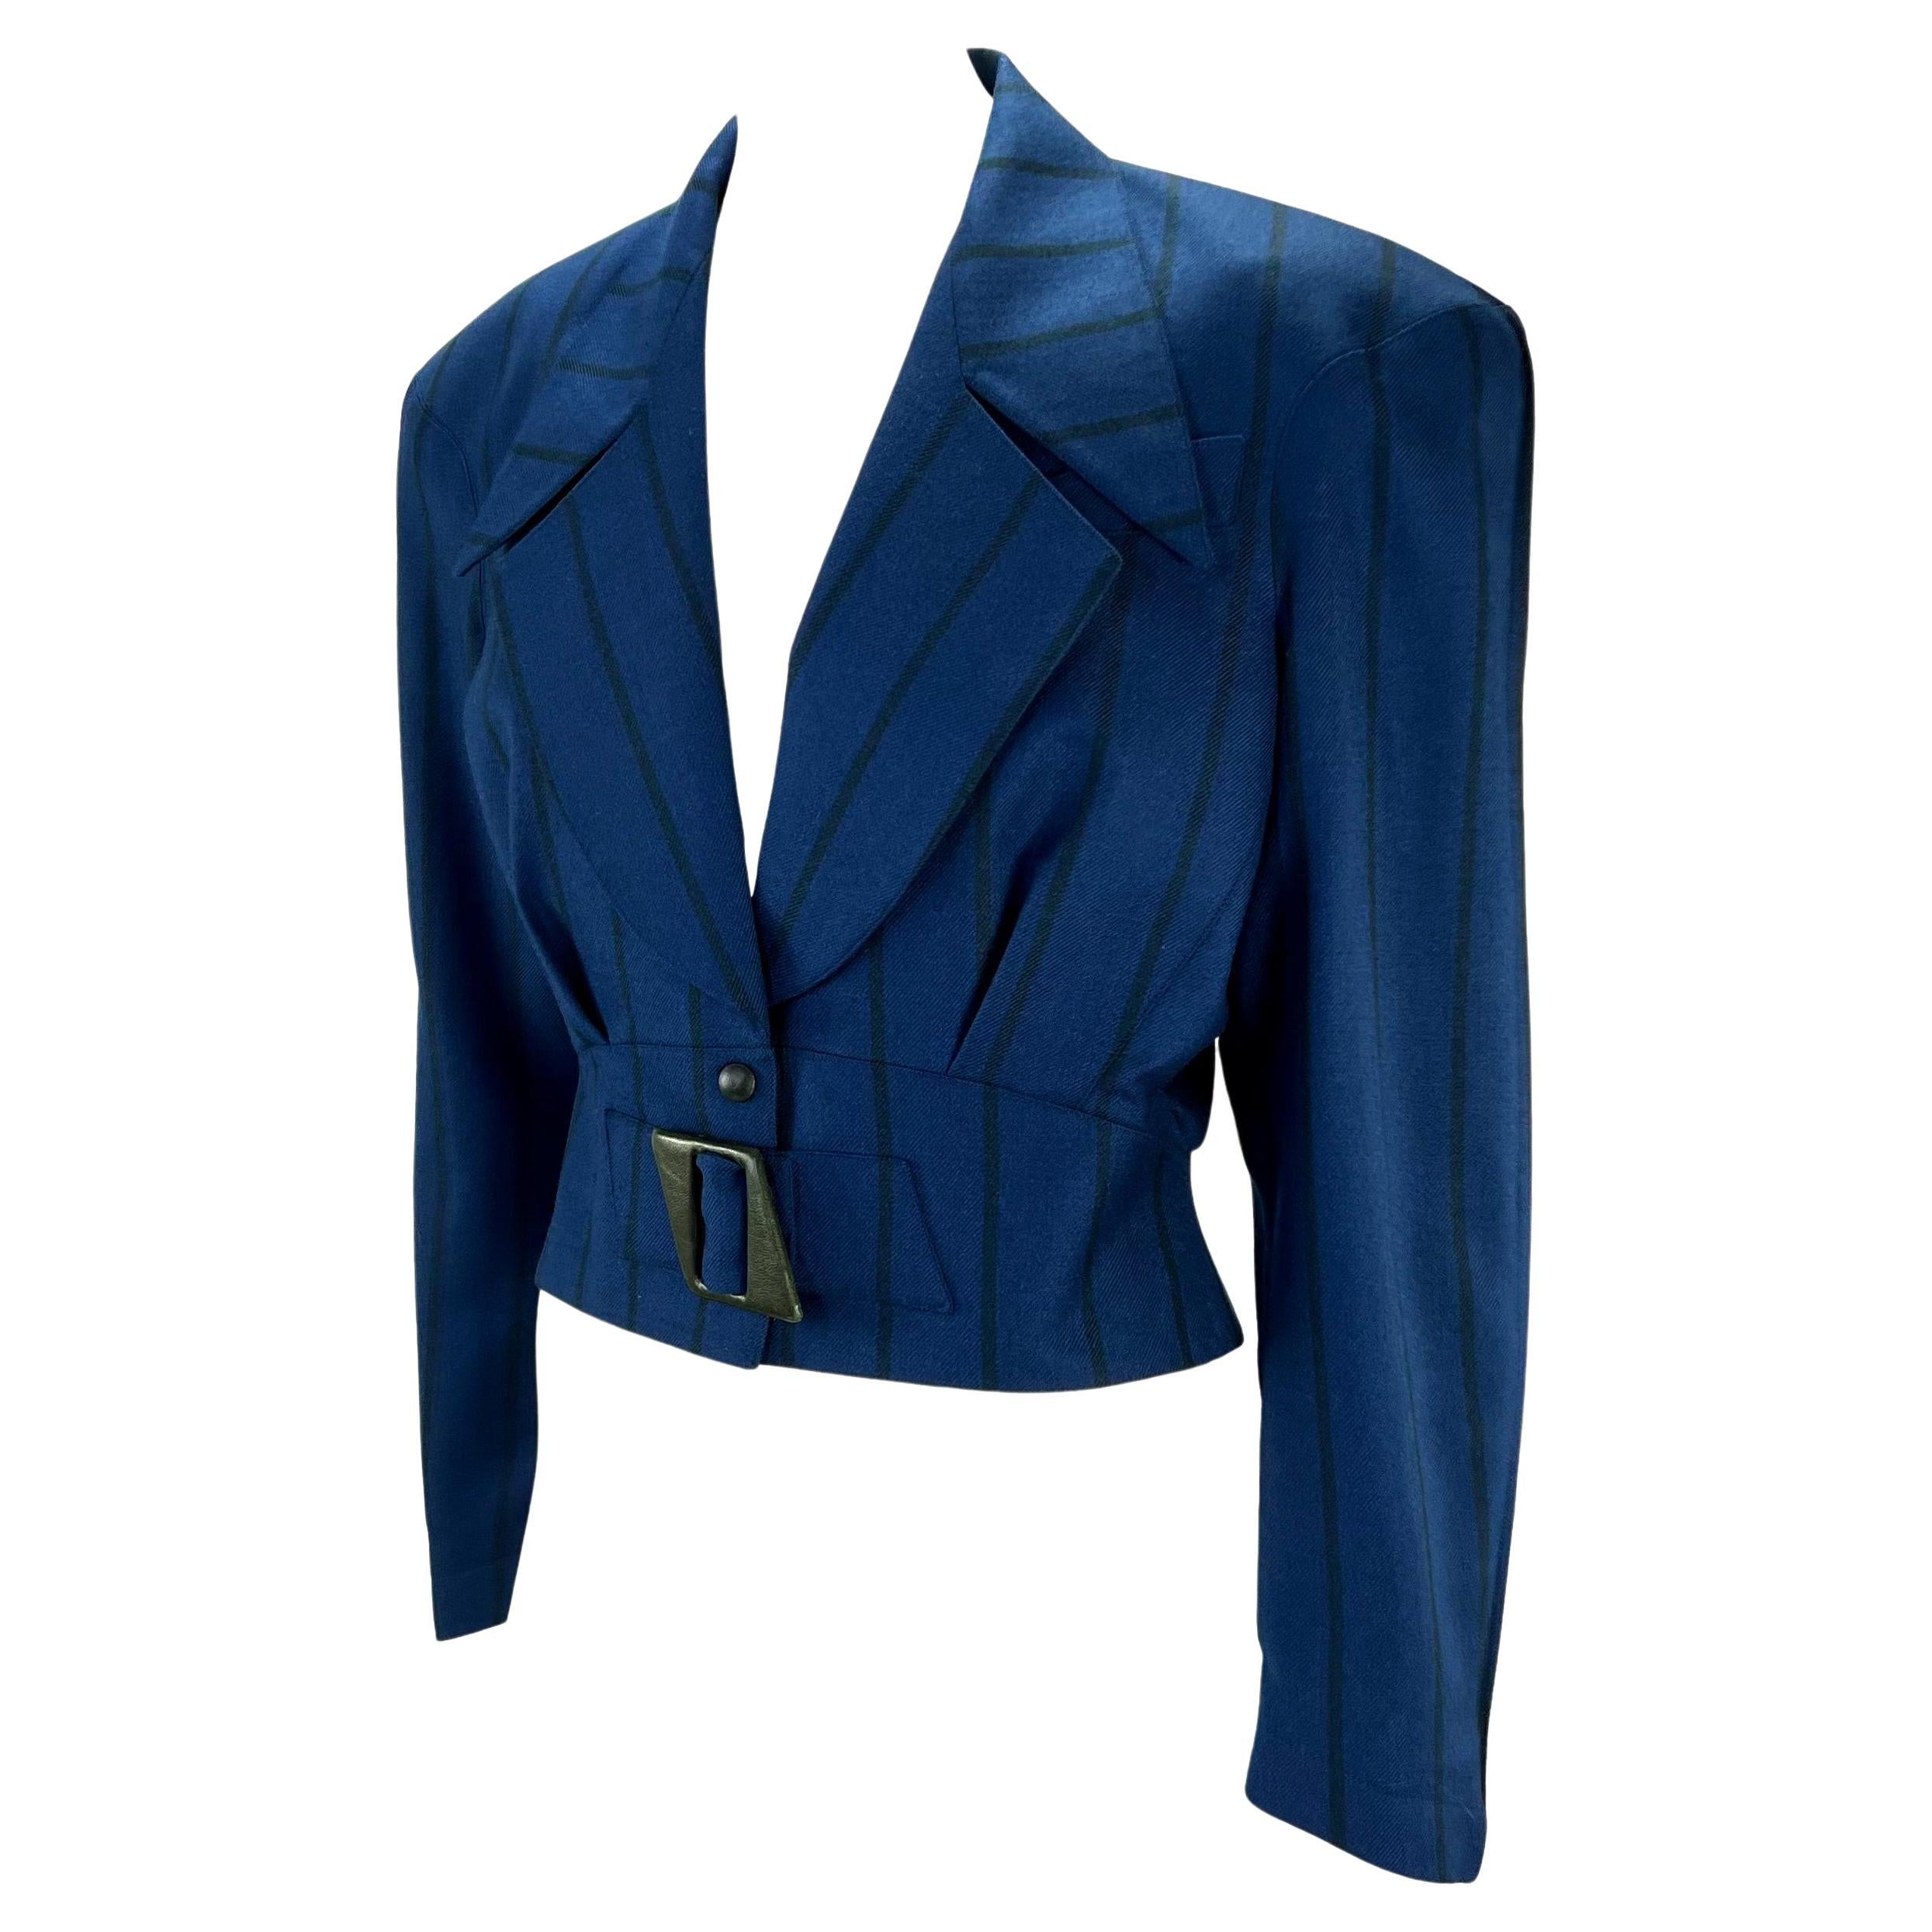 Presenting a blue cropped pinstripe Thierry Mugler blazer, designed by Manfred Mugler. From the 1980s, this blazer is constructed of worsted wool and boasts the structural design and cinched waist Mugler is renowned for. The jacket features large